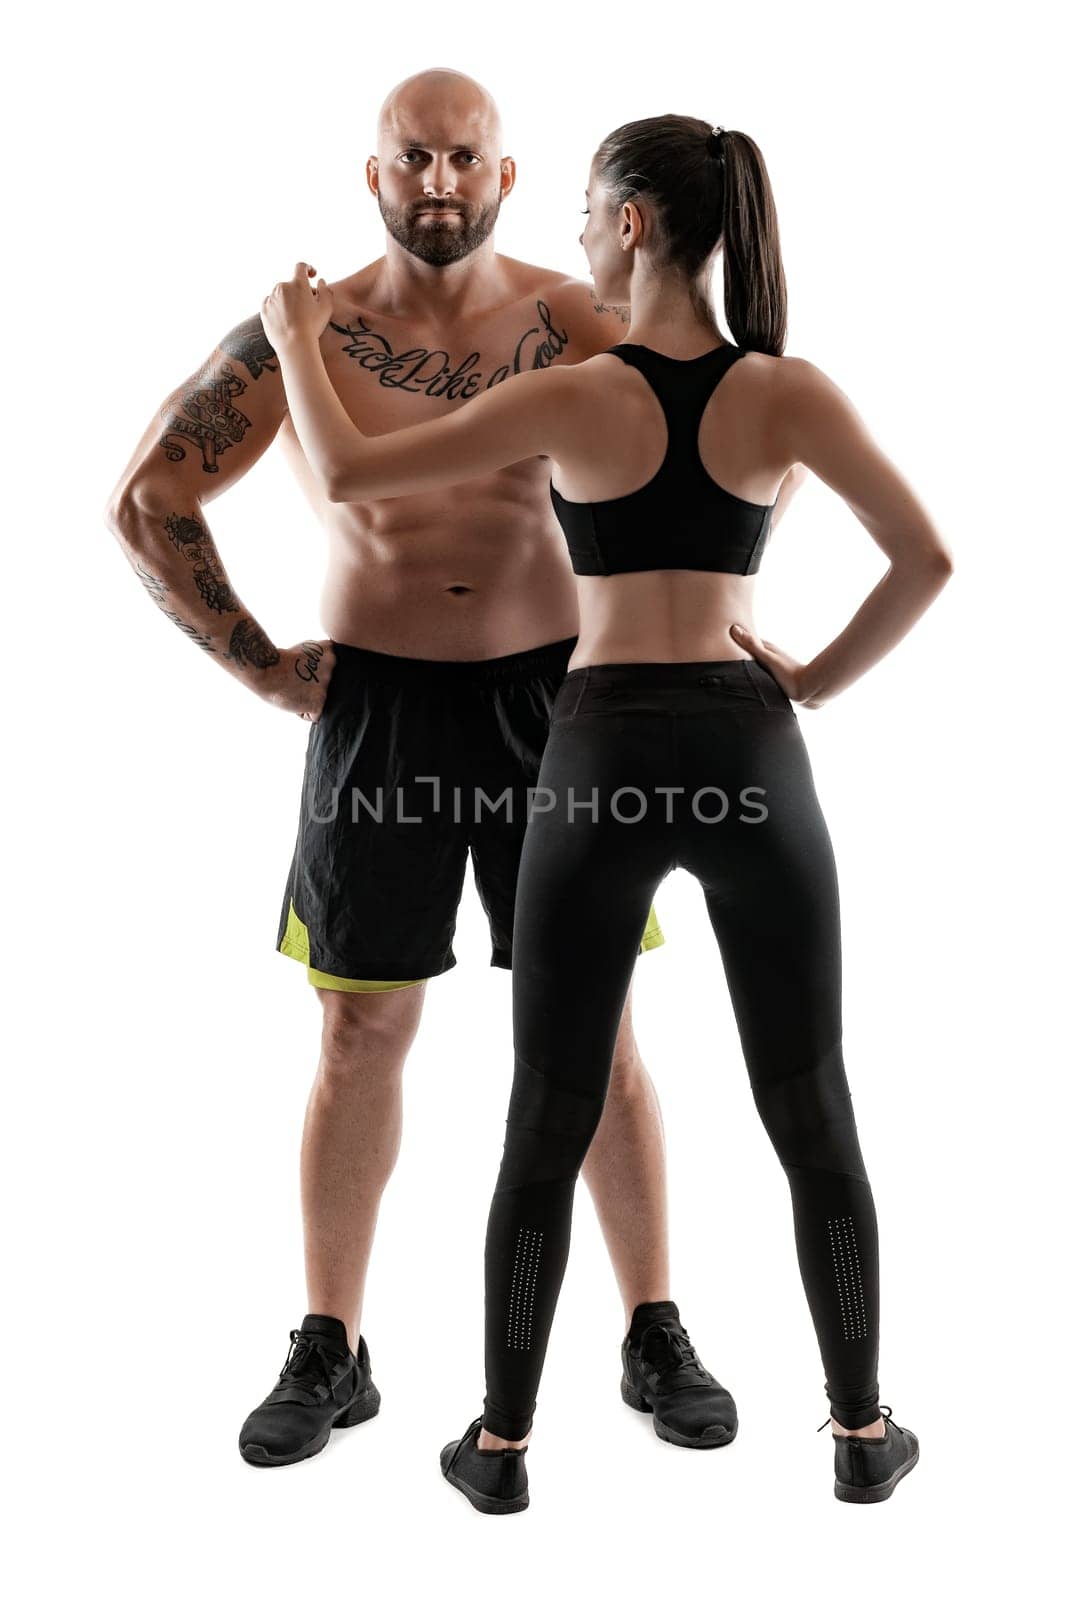 Handsome bald, tattooed male in black shorts and sneakers with attractive brunette female in leggings and top, standing back,are posing isolated on white background and looking at the camera. Fitness couple, chic muscular bodies, gym concept. The love story.